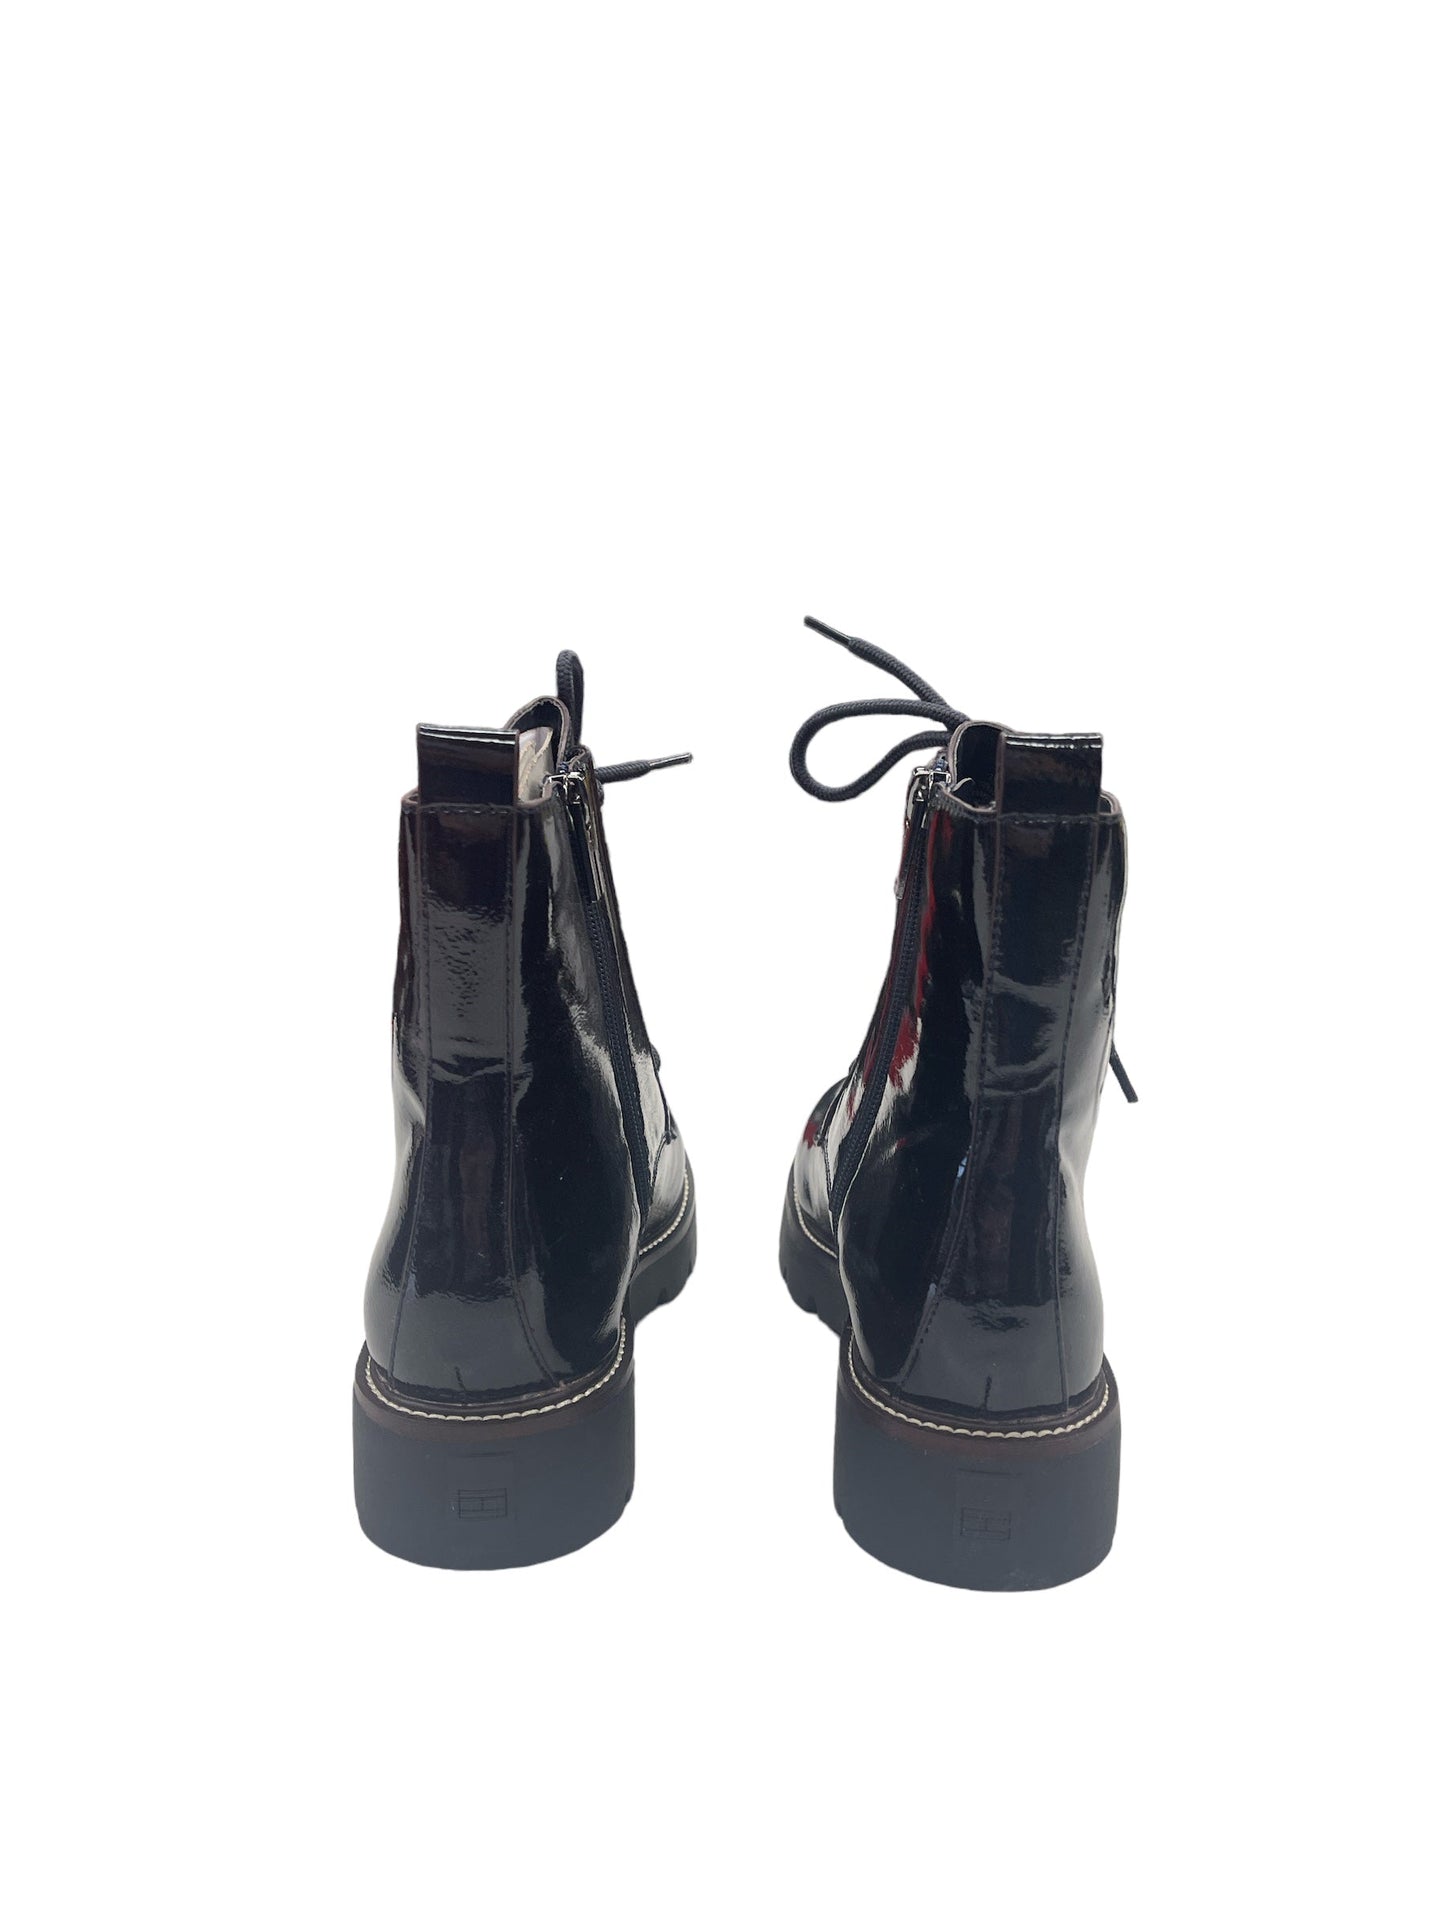 Boots Combat By Tommy Hilfiger  Size: 7.5